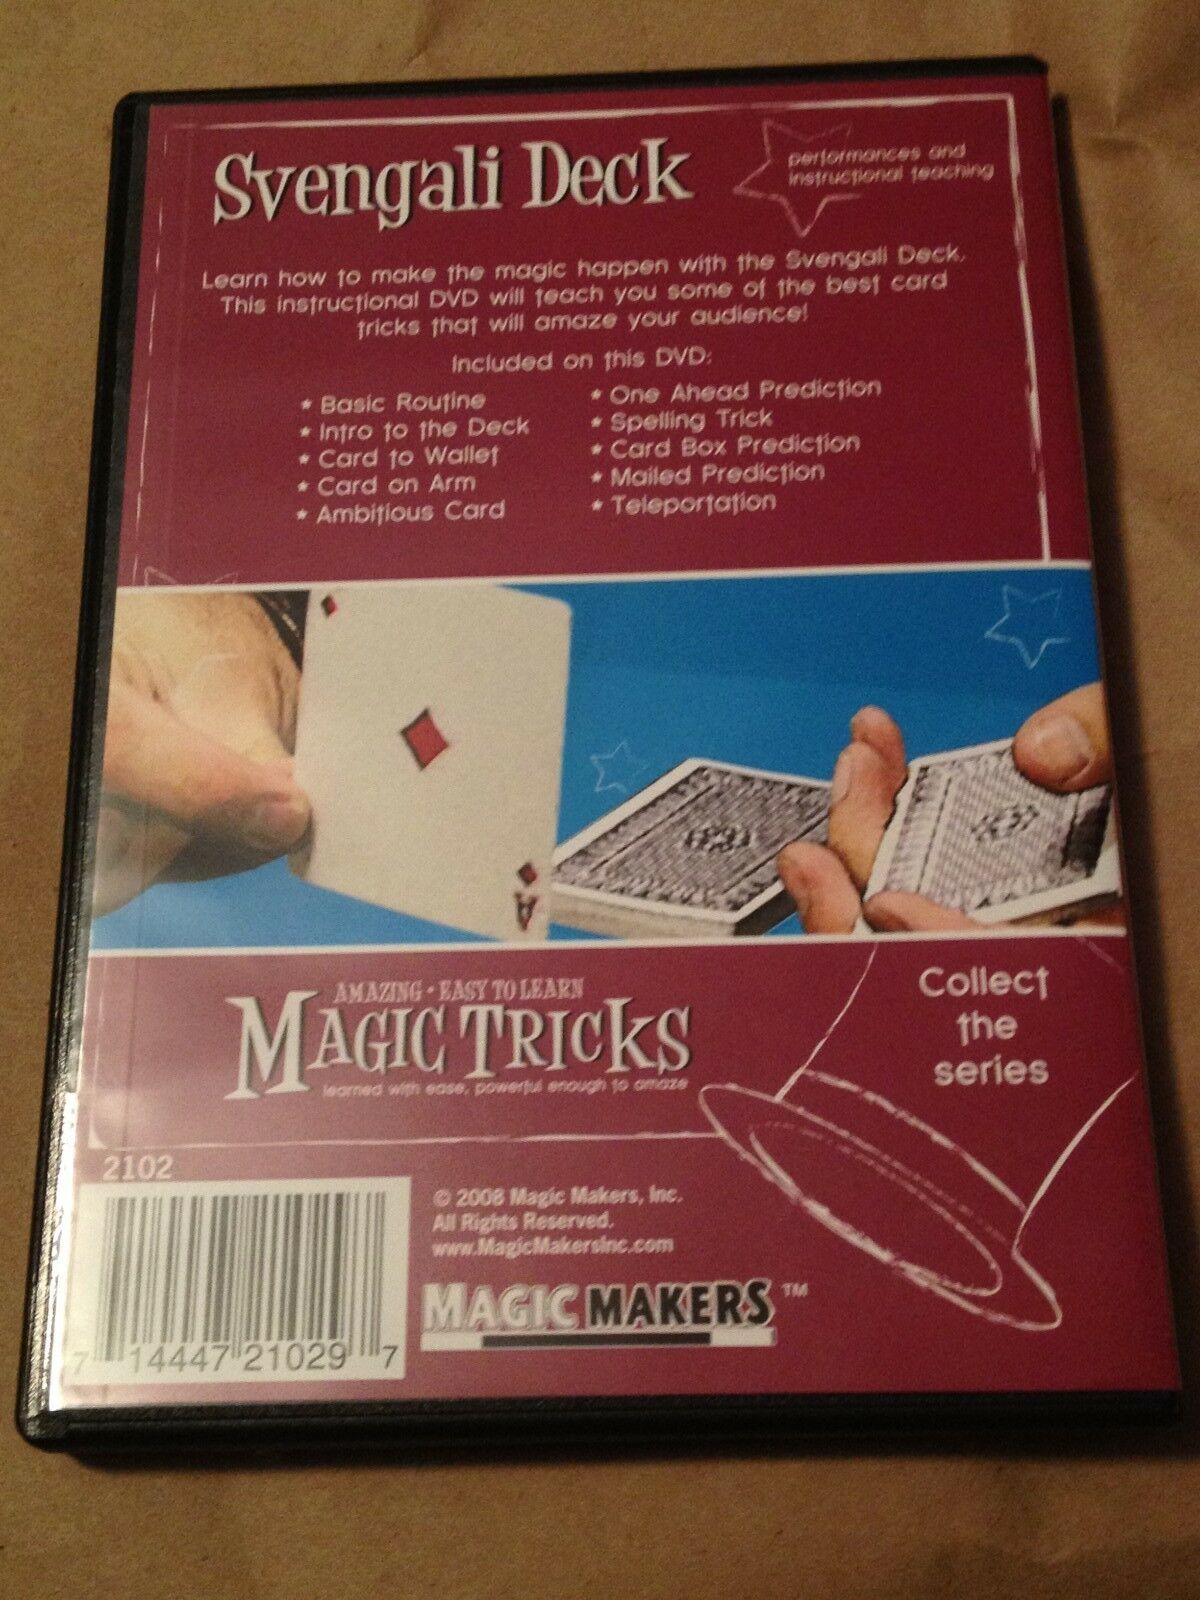 Easy Magic Tricks to Amaze Your Audience: How to Learn Magic